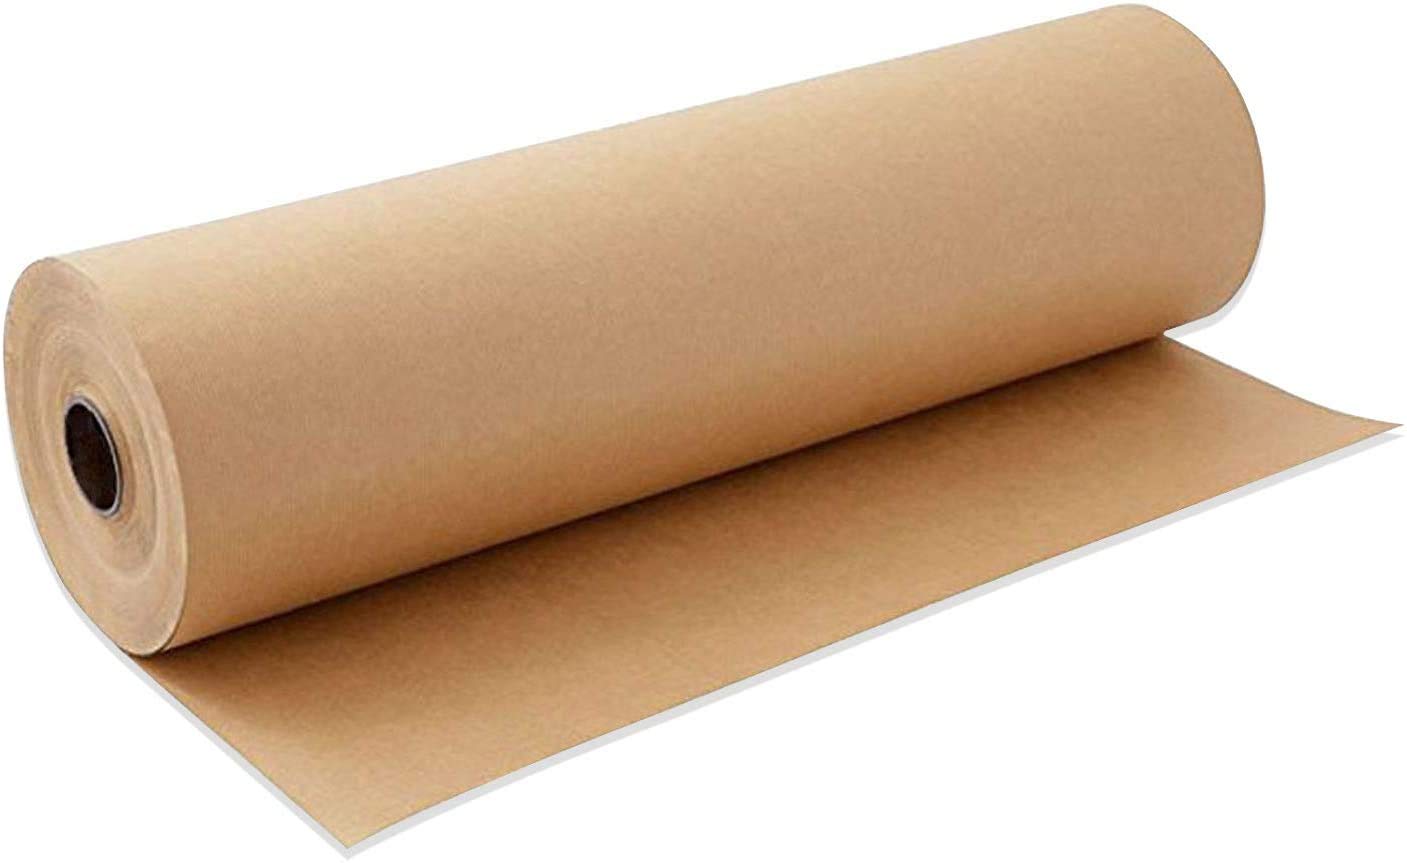 Coobbar Kraft Wrapping Paper Roll,100 Feet Recycled Kraft Paper For  Packing, Moving, Gift Wrapping, Postal, Shipping, Parcel, Wall Art